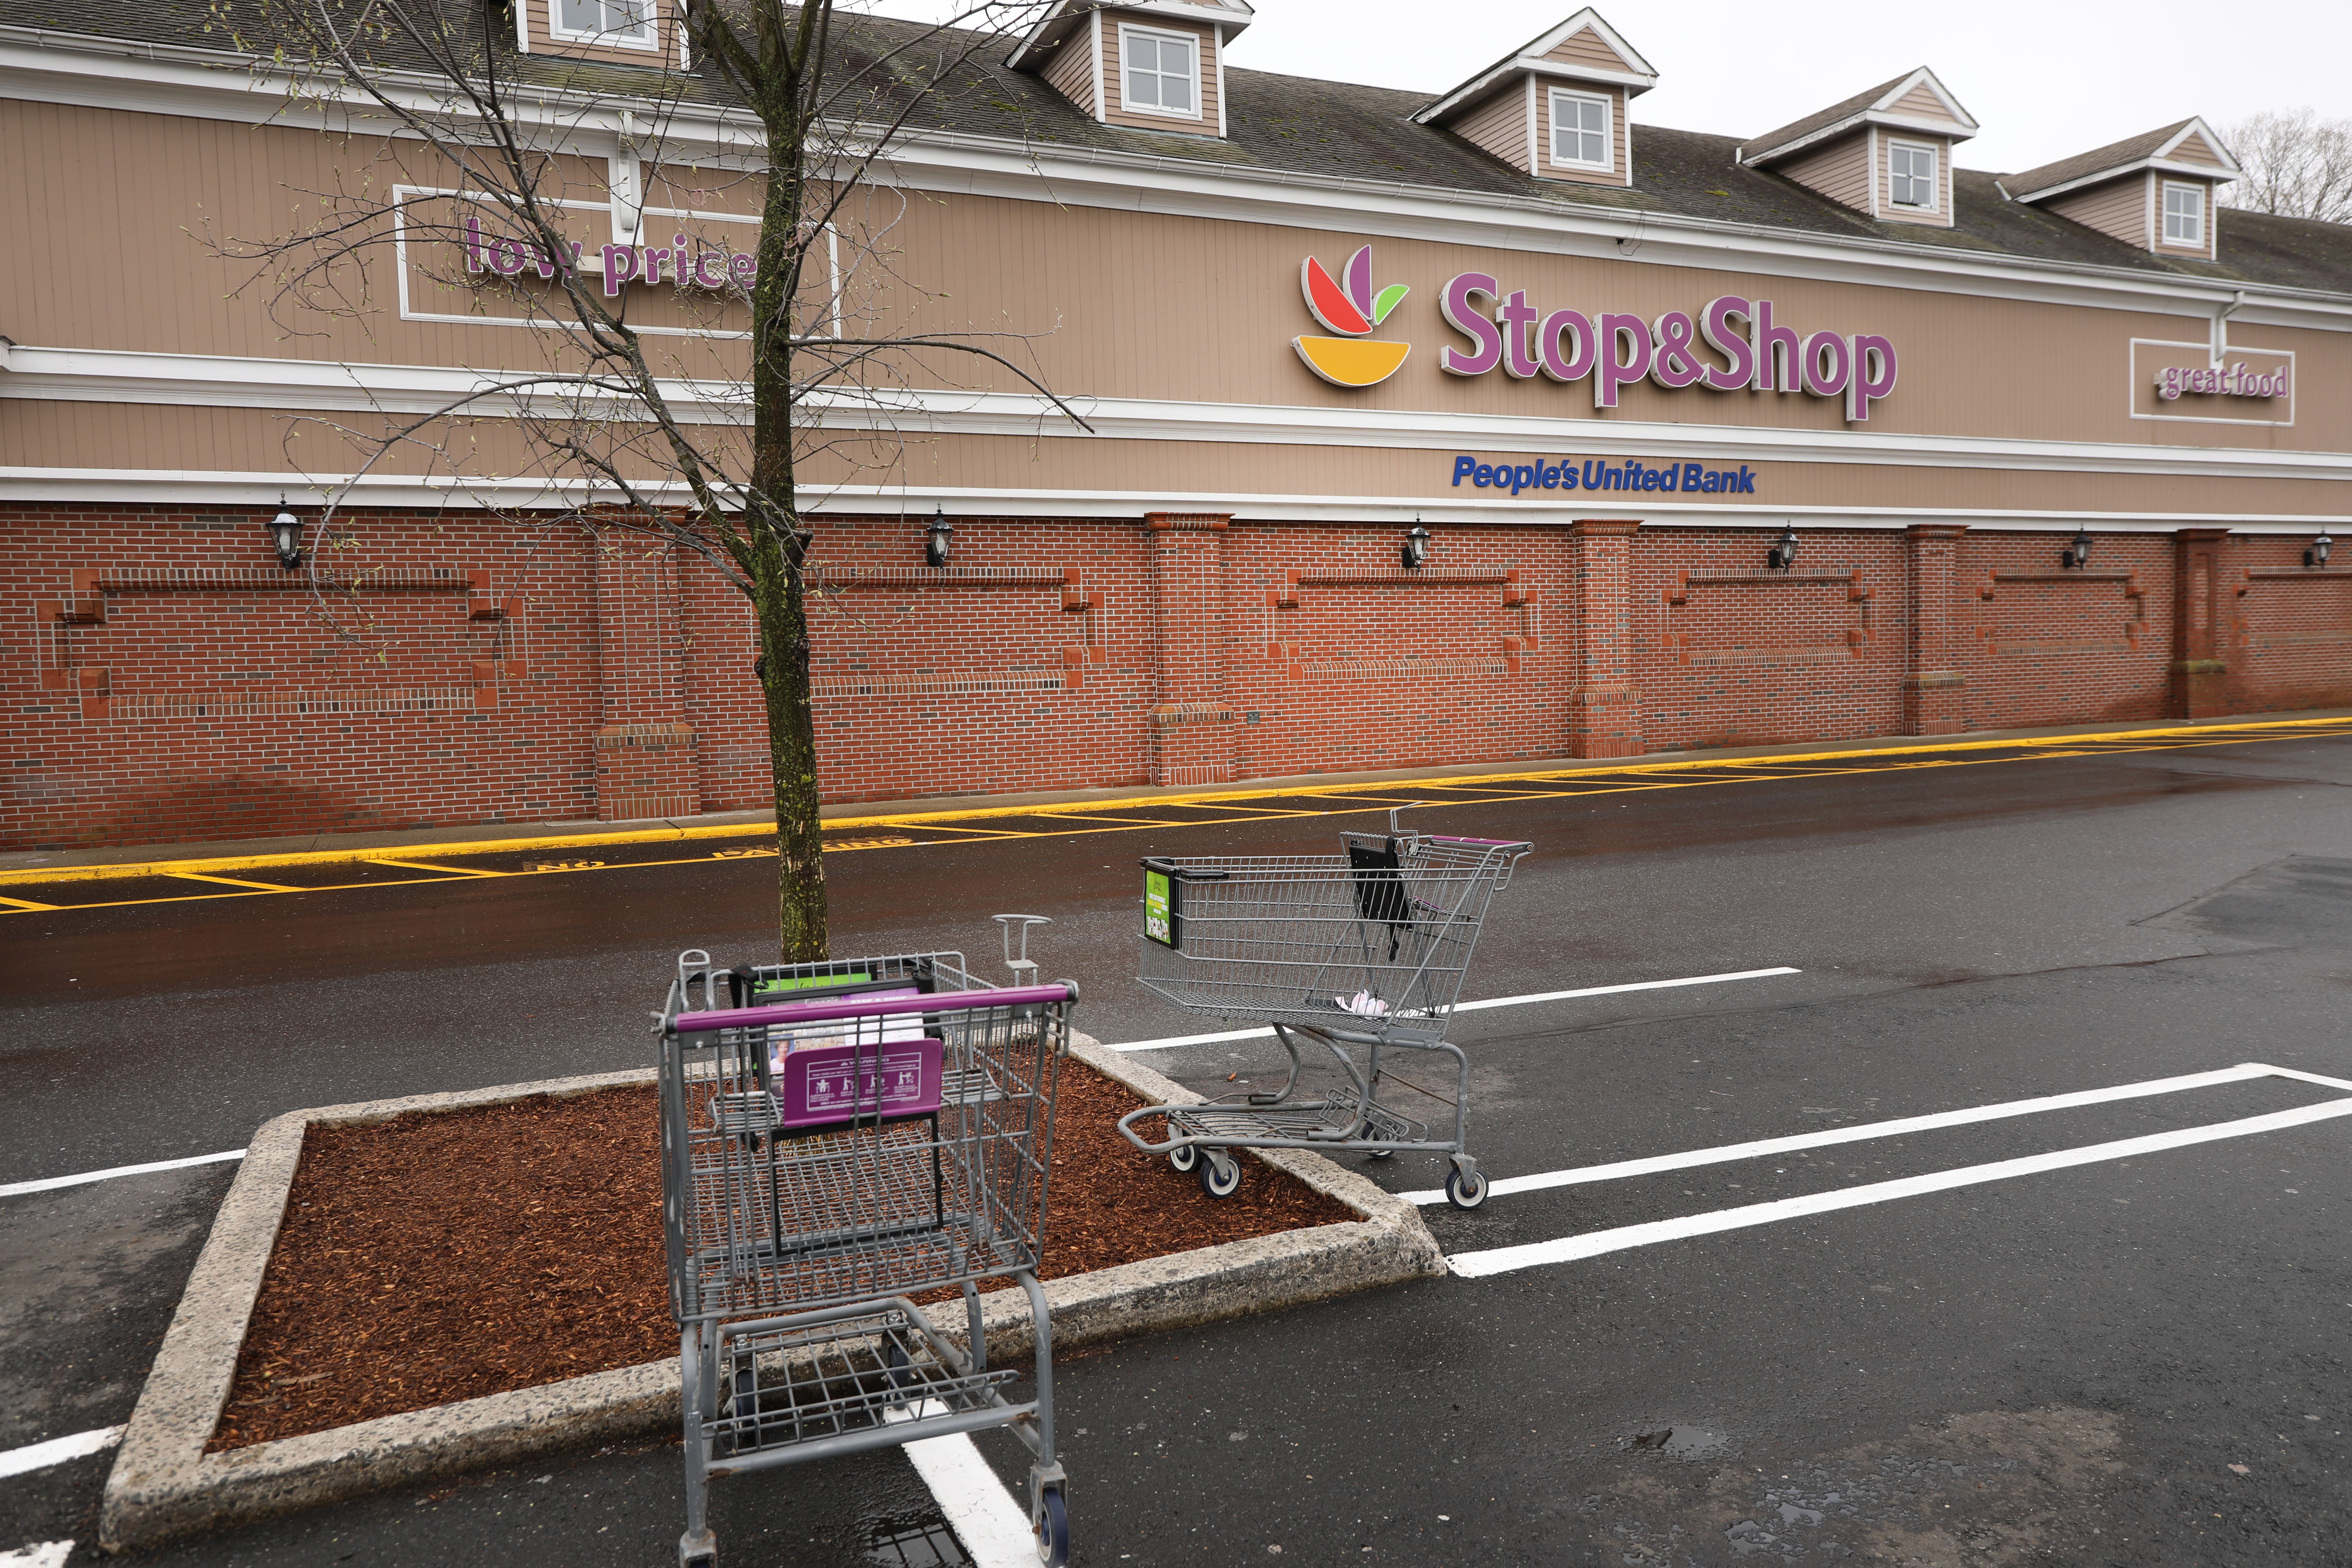 Stop & Shop will close an unspecified number of ‘underperforming’ locations, following in the footsteps of several retailers this year